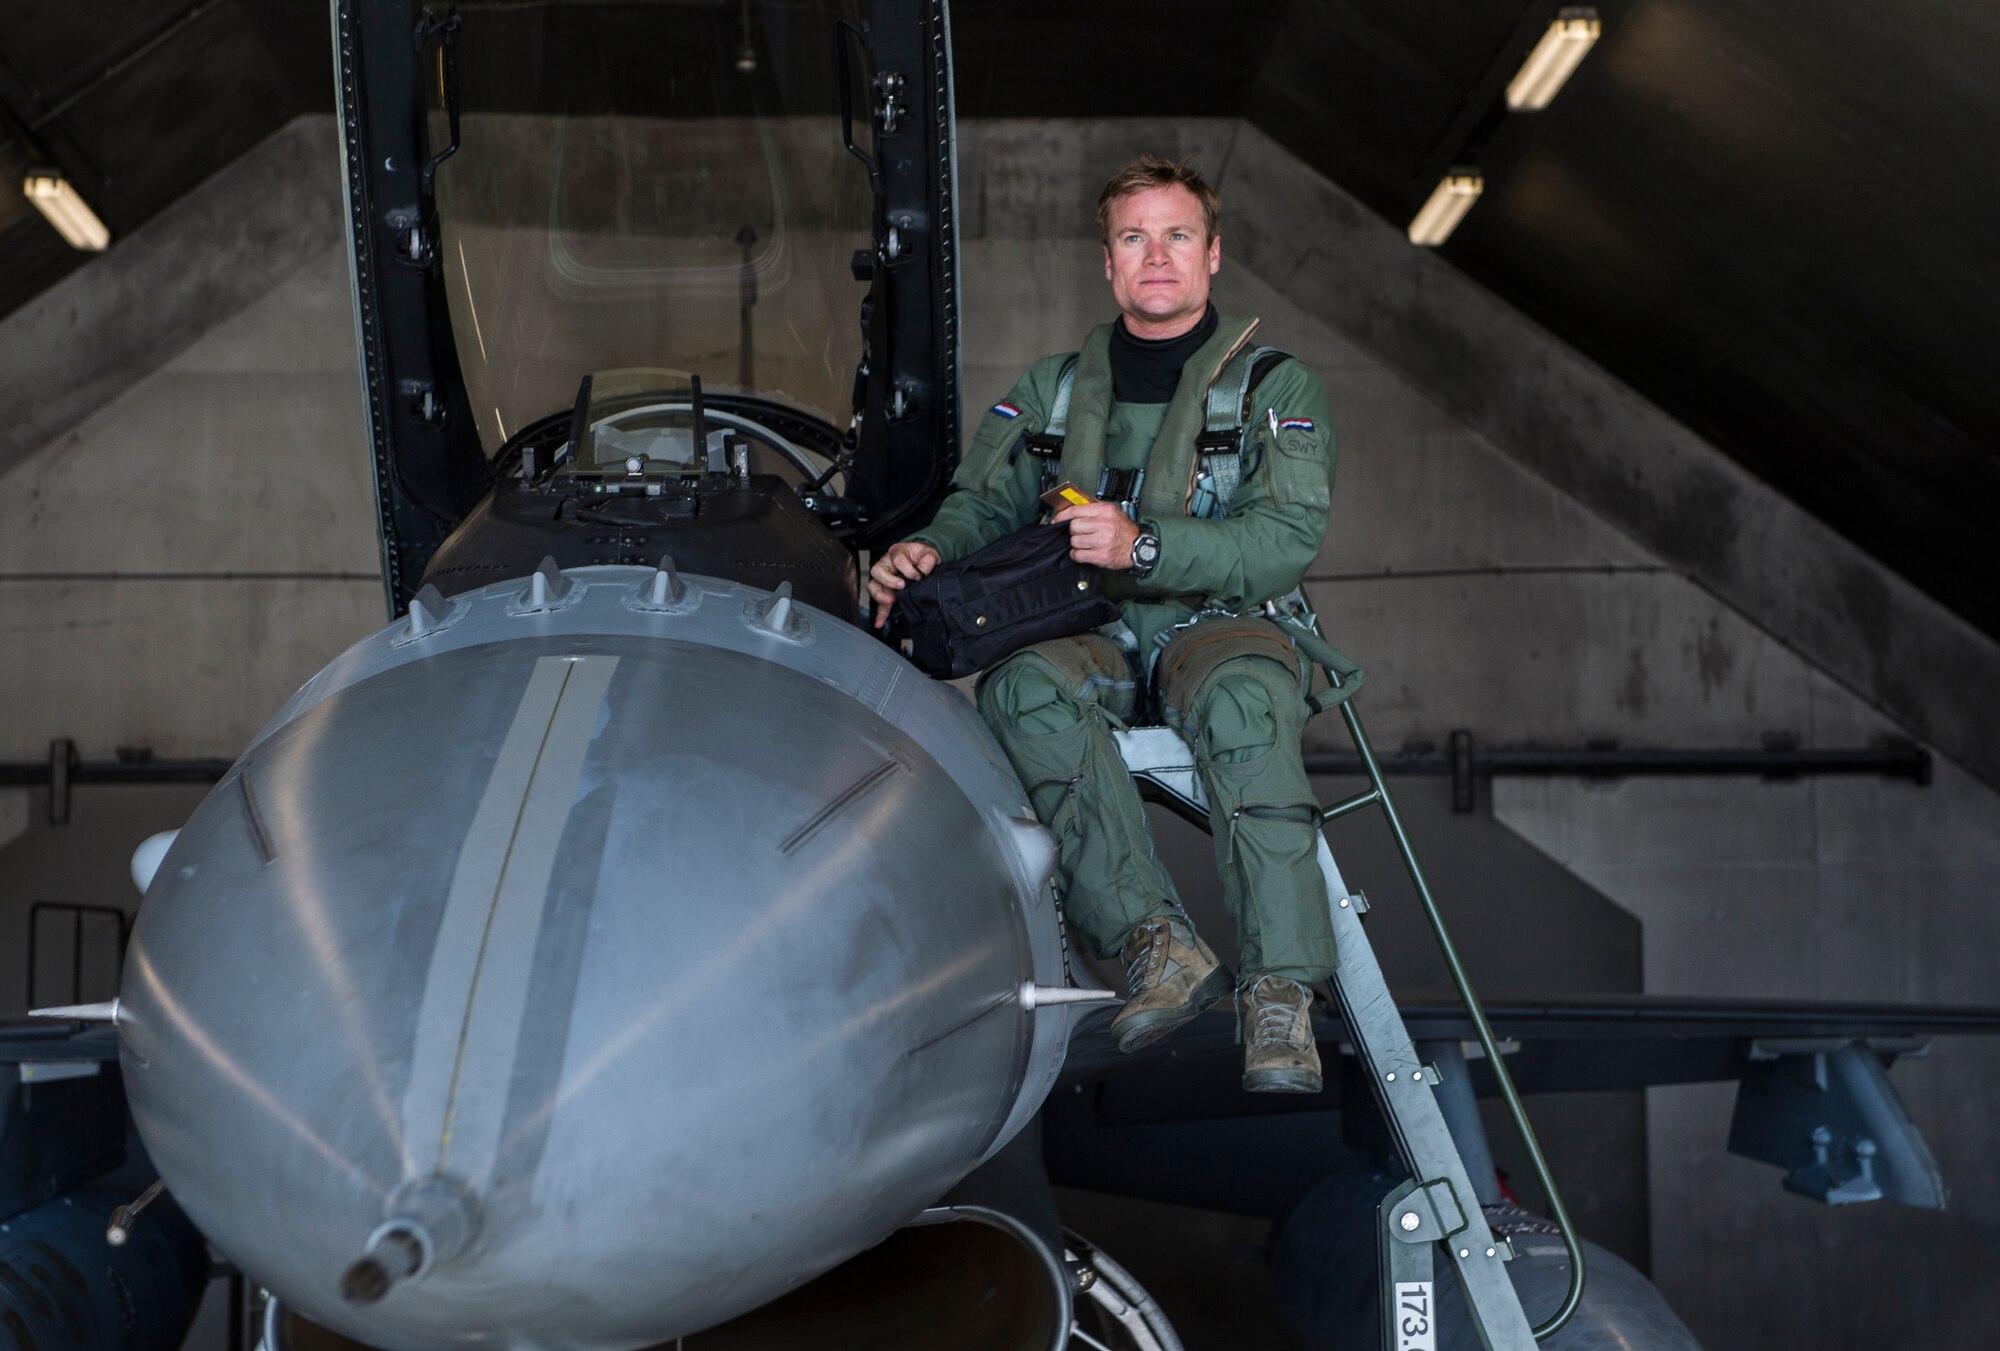 U.S. Air Force Exchange Pilot Maj. Kevin Sweeney climbs out of an F-16 Falcon at Leeuwarden Air Base, Netherlands, March 27, 2017 during the NATO air forces' Frisian Flag training exercise. Nearly 300 U.S. Airmen and 12 F15C Eagles of the 122nd Expeditionary Fighter Squadron participated in training alongside NATO allies to strengthen interoperability and demonstrate U.S. commitment to the security and stability of Europe. During Frisian Flag, NATO air forces conducted air defense missions, offensive missions, missions to protect other aircraft and missions carried out to eliminate static and dynamic targets on land or at sea. (U.S. Air Force Photo/Master Sgt. Brian Ferguson)